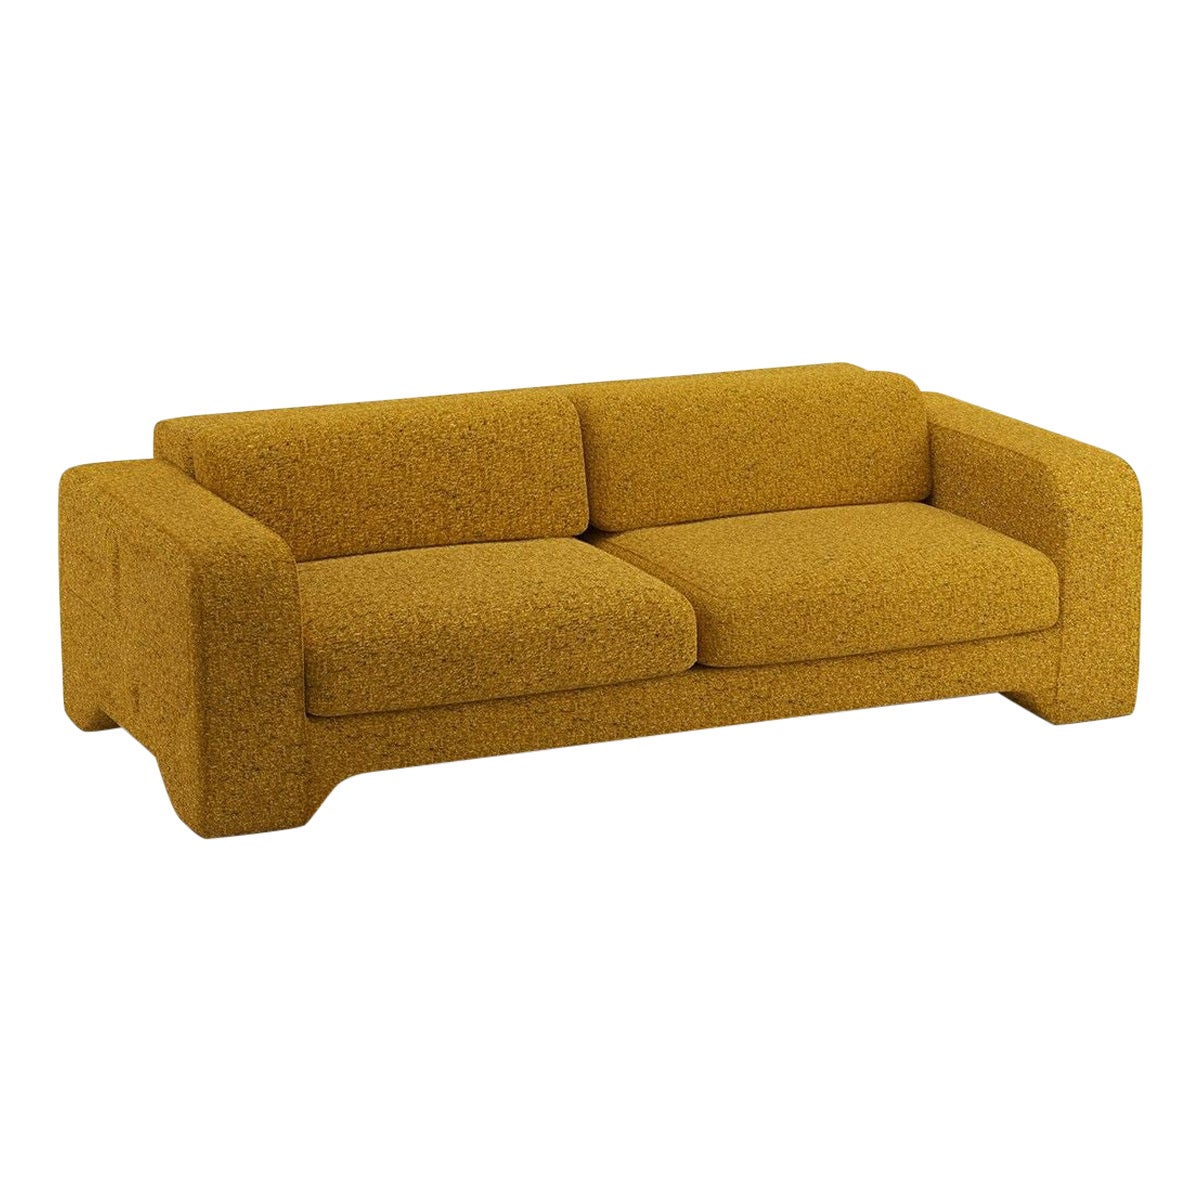 Popus Editions Giovanna 4 Seater Sofa in Amber Venice Chenille Velvet Fabric For Sale